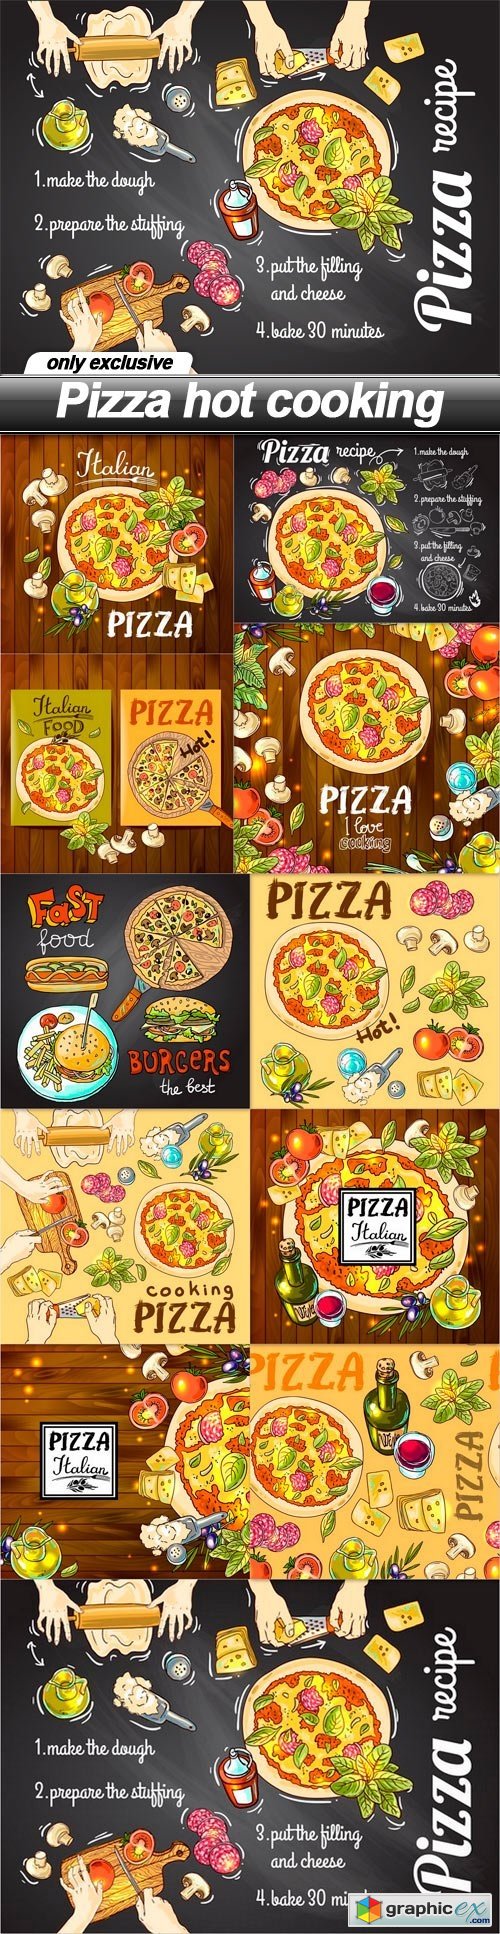 Pizza hot cooking - 11 EPS